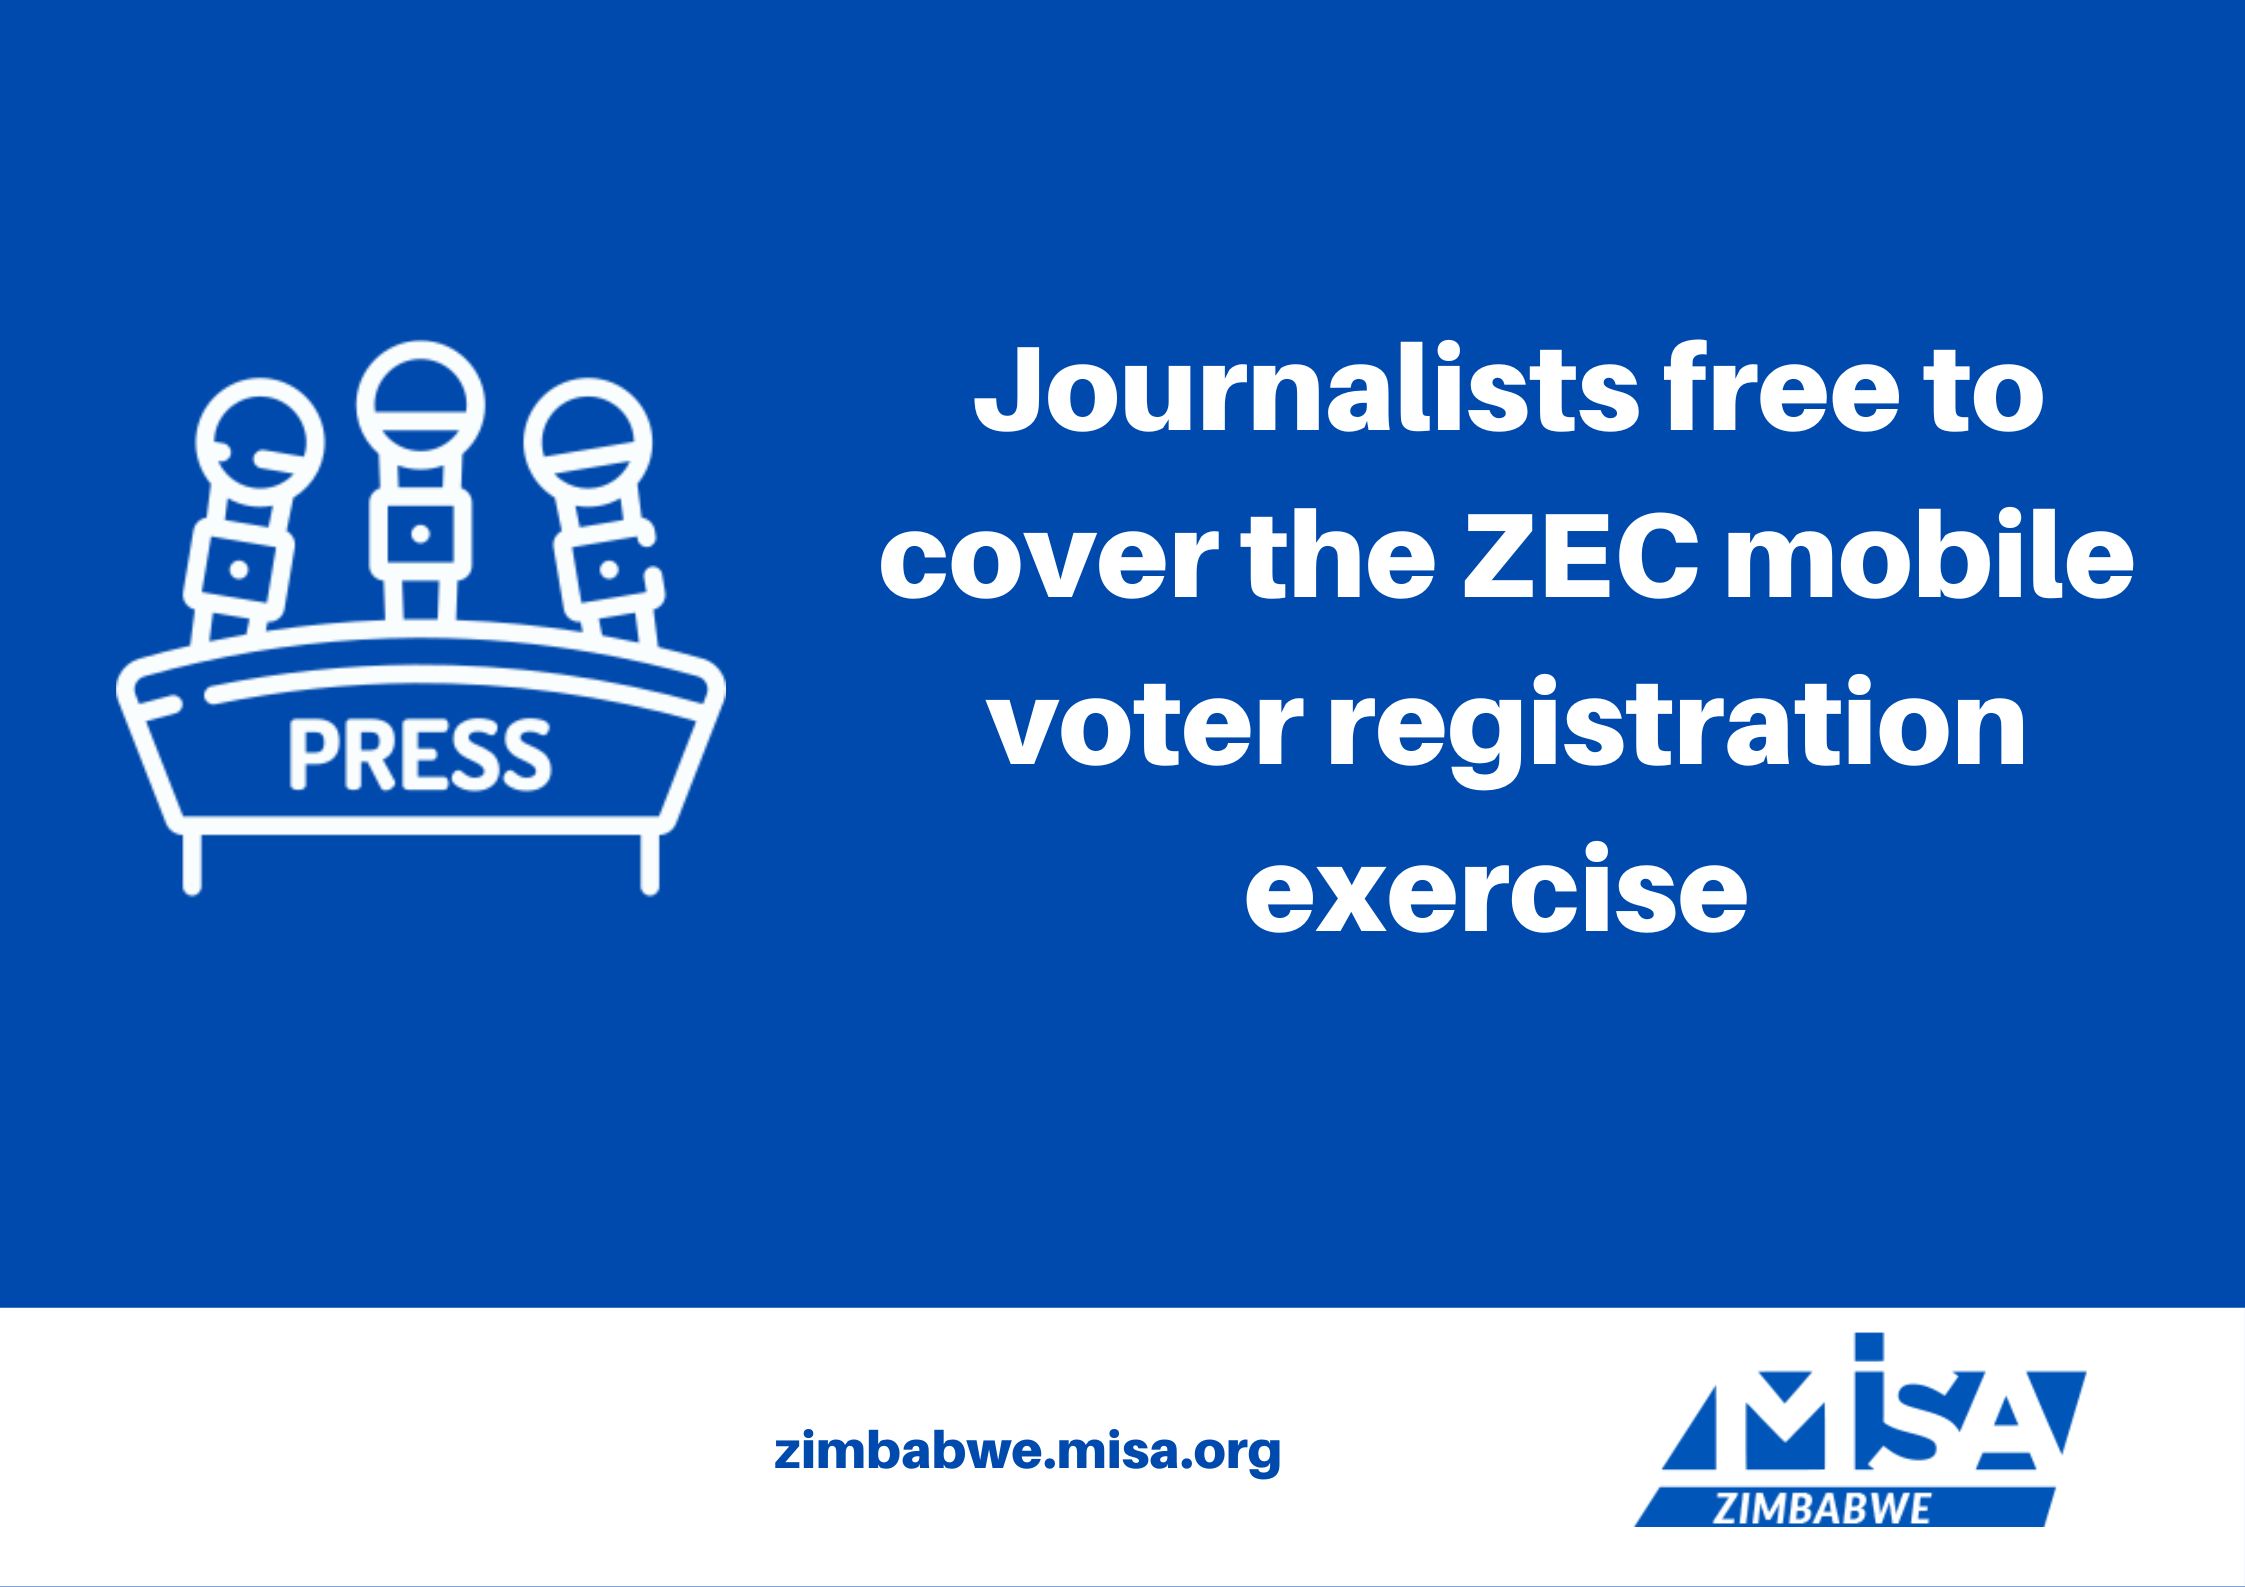 Journalists free to cover the ZEC mobile voter registration exercise 